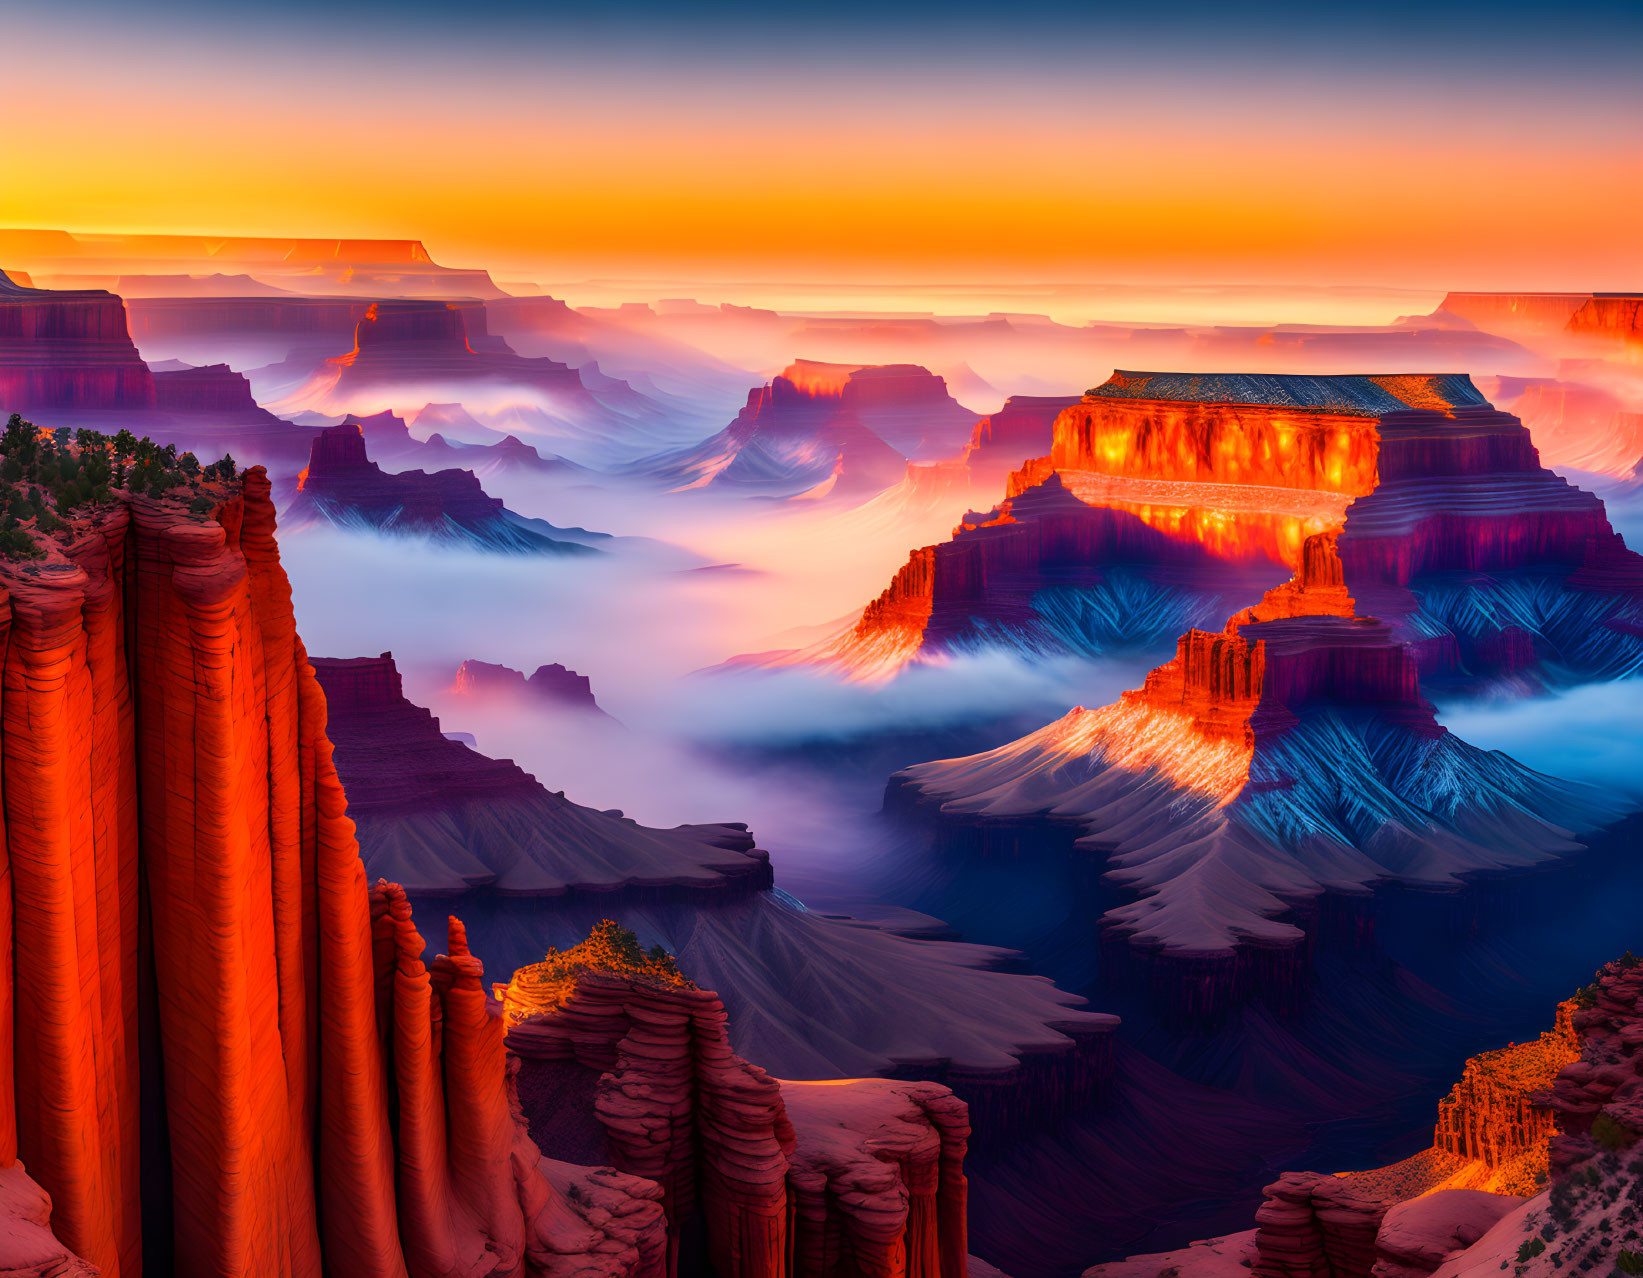 Majestic Grand Canyon sunrise over clouds and cliffs